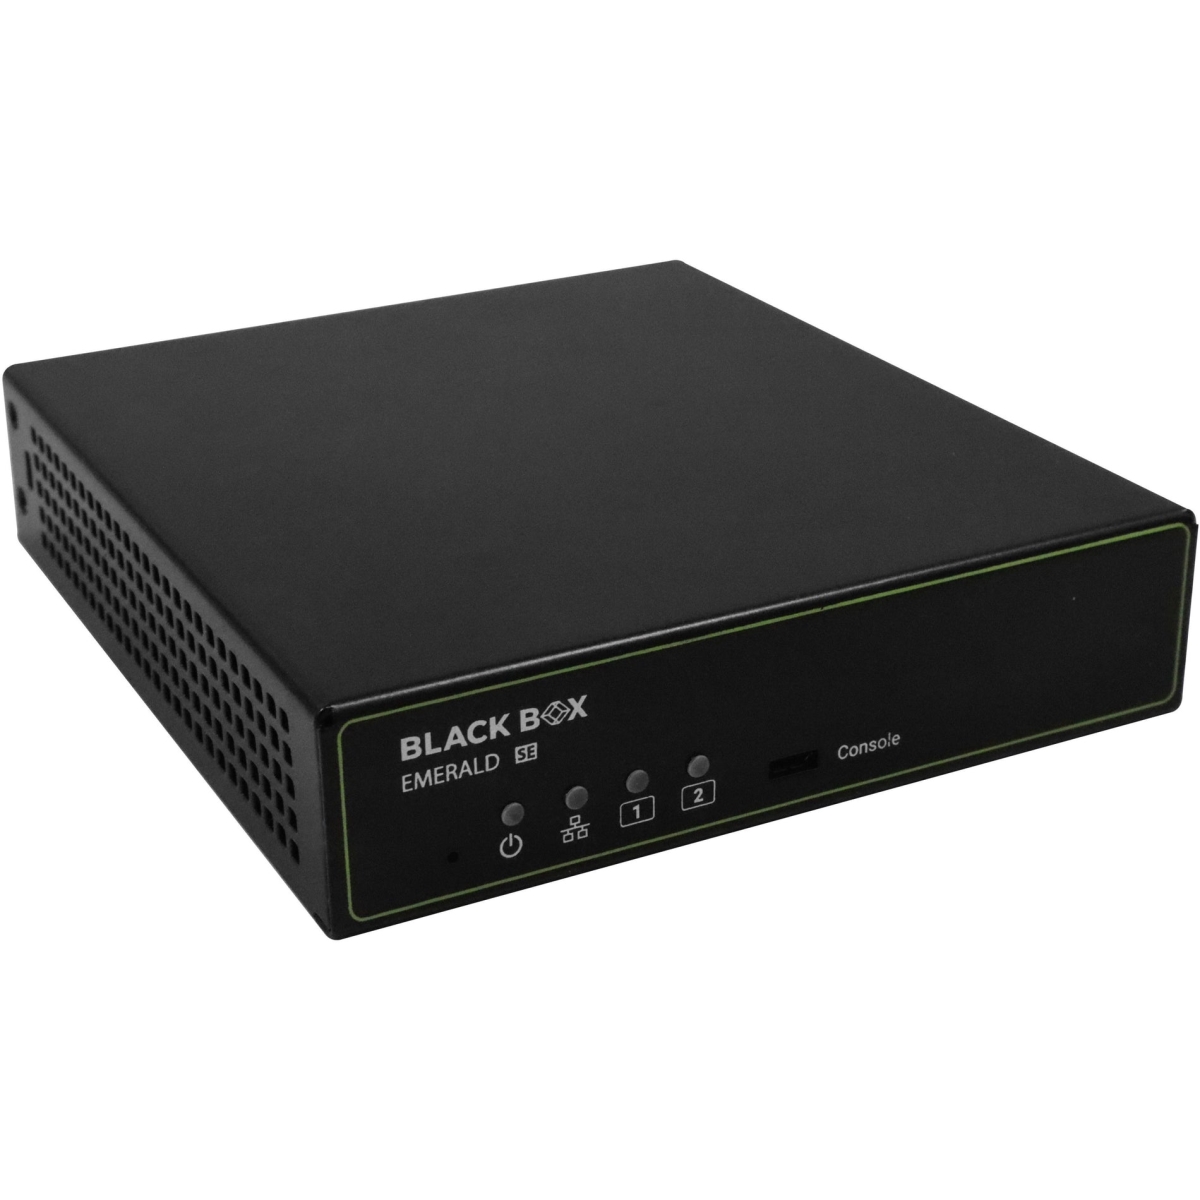 Picture of Black Box EMD2002SE-DP-T Emerald SE KVM-Over-IP Transmitter with Dual-Monitor Support